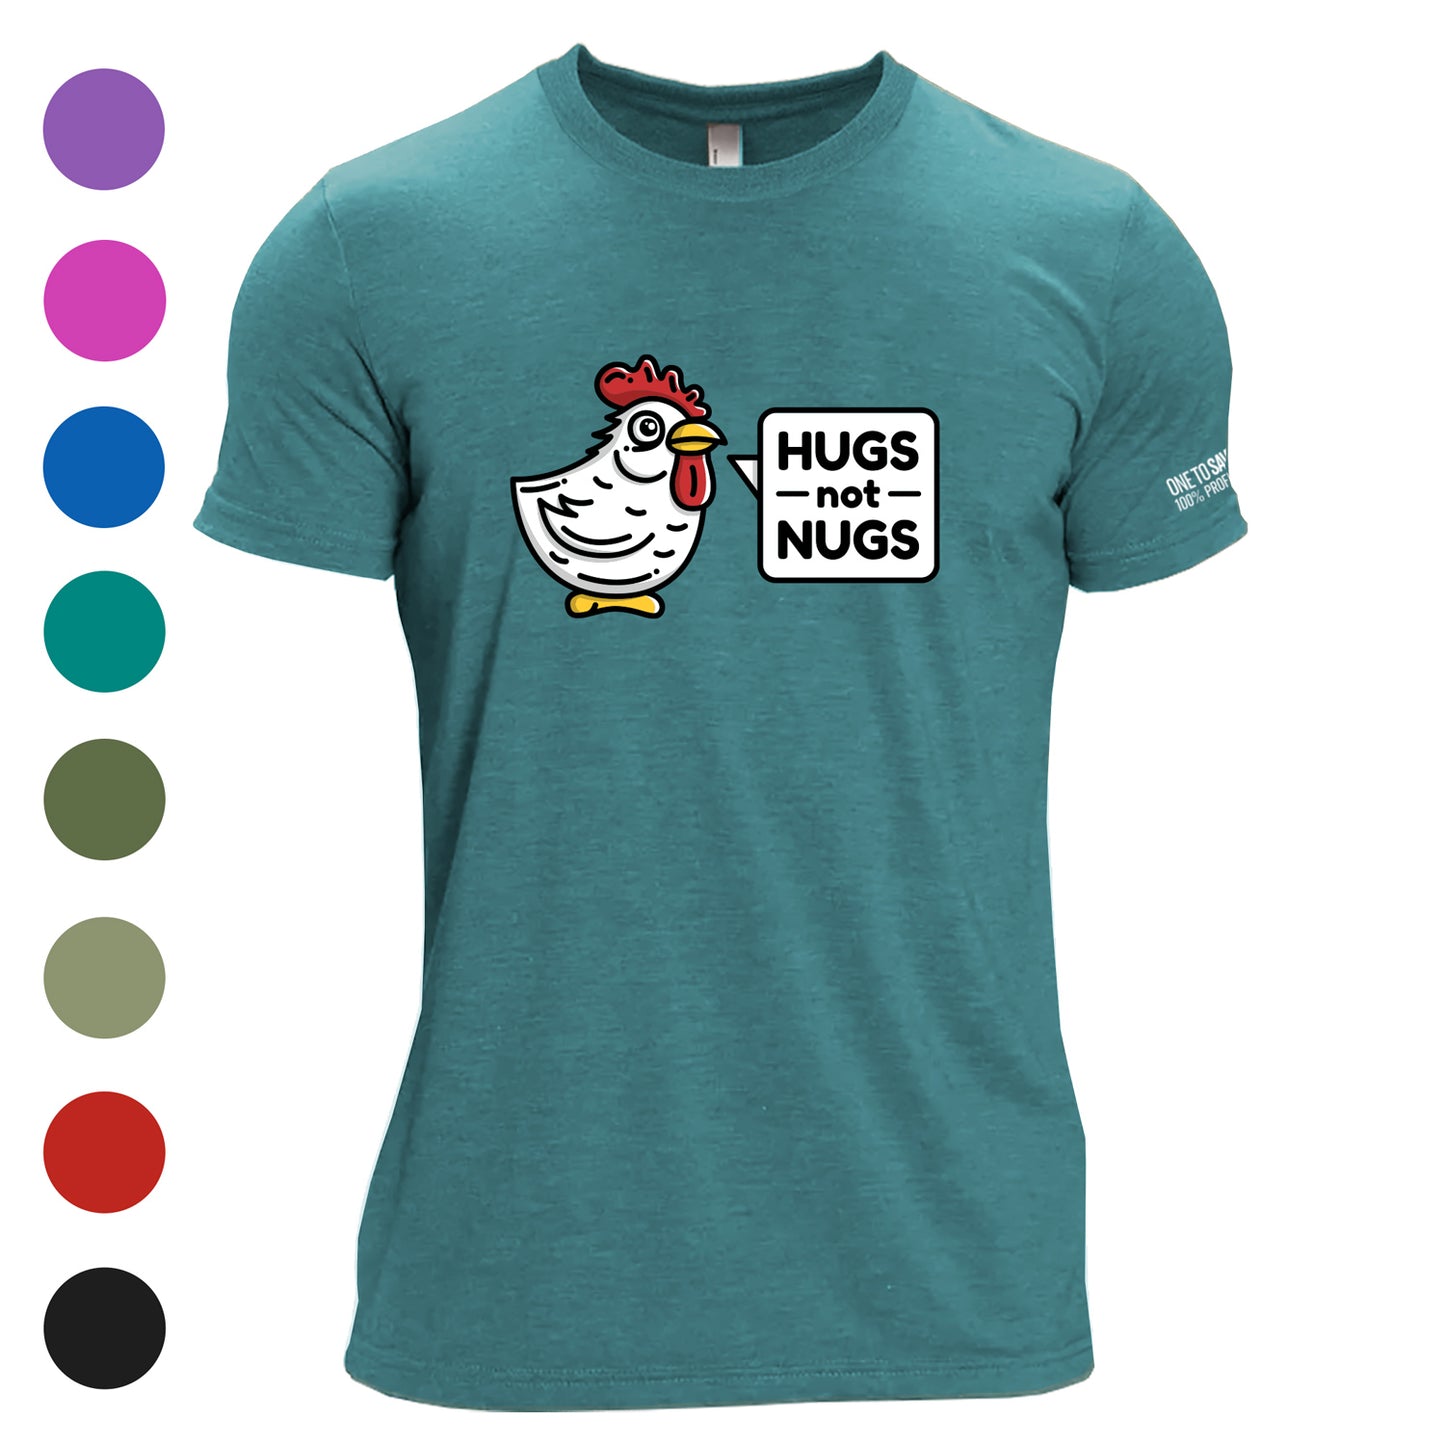 Hugs Not Nugs Tri-Blend T-Shirt - Available in 9 Colors